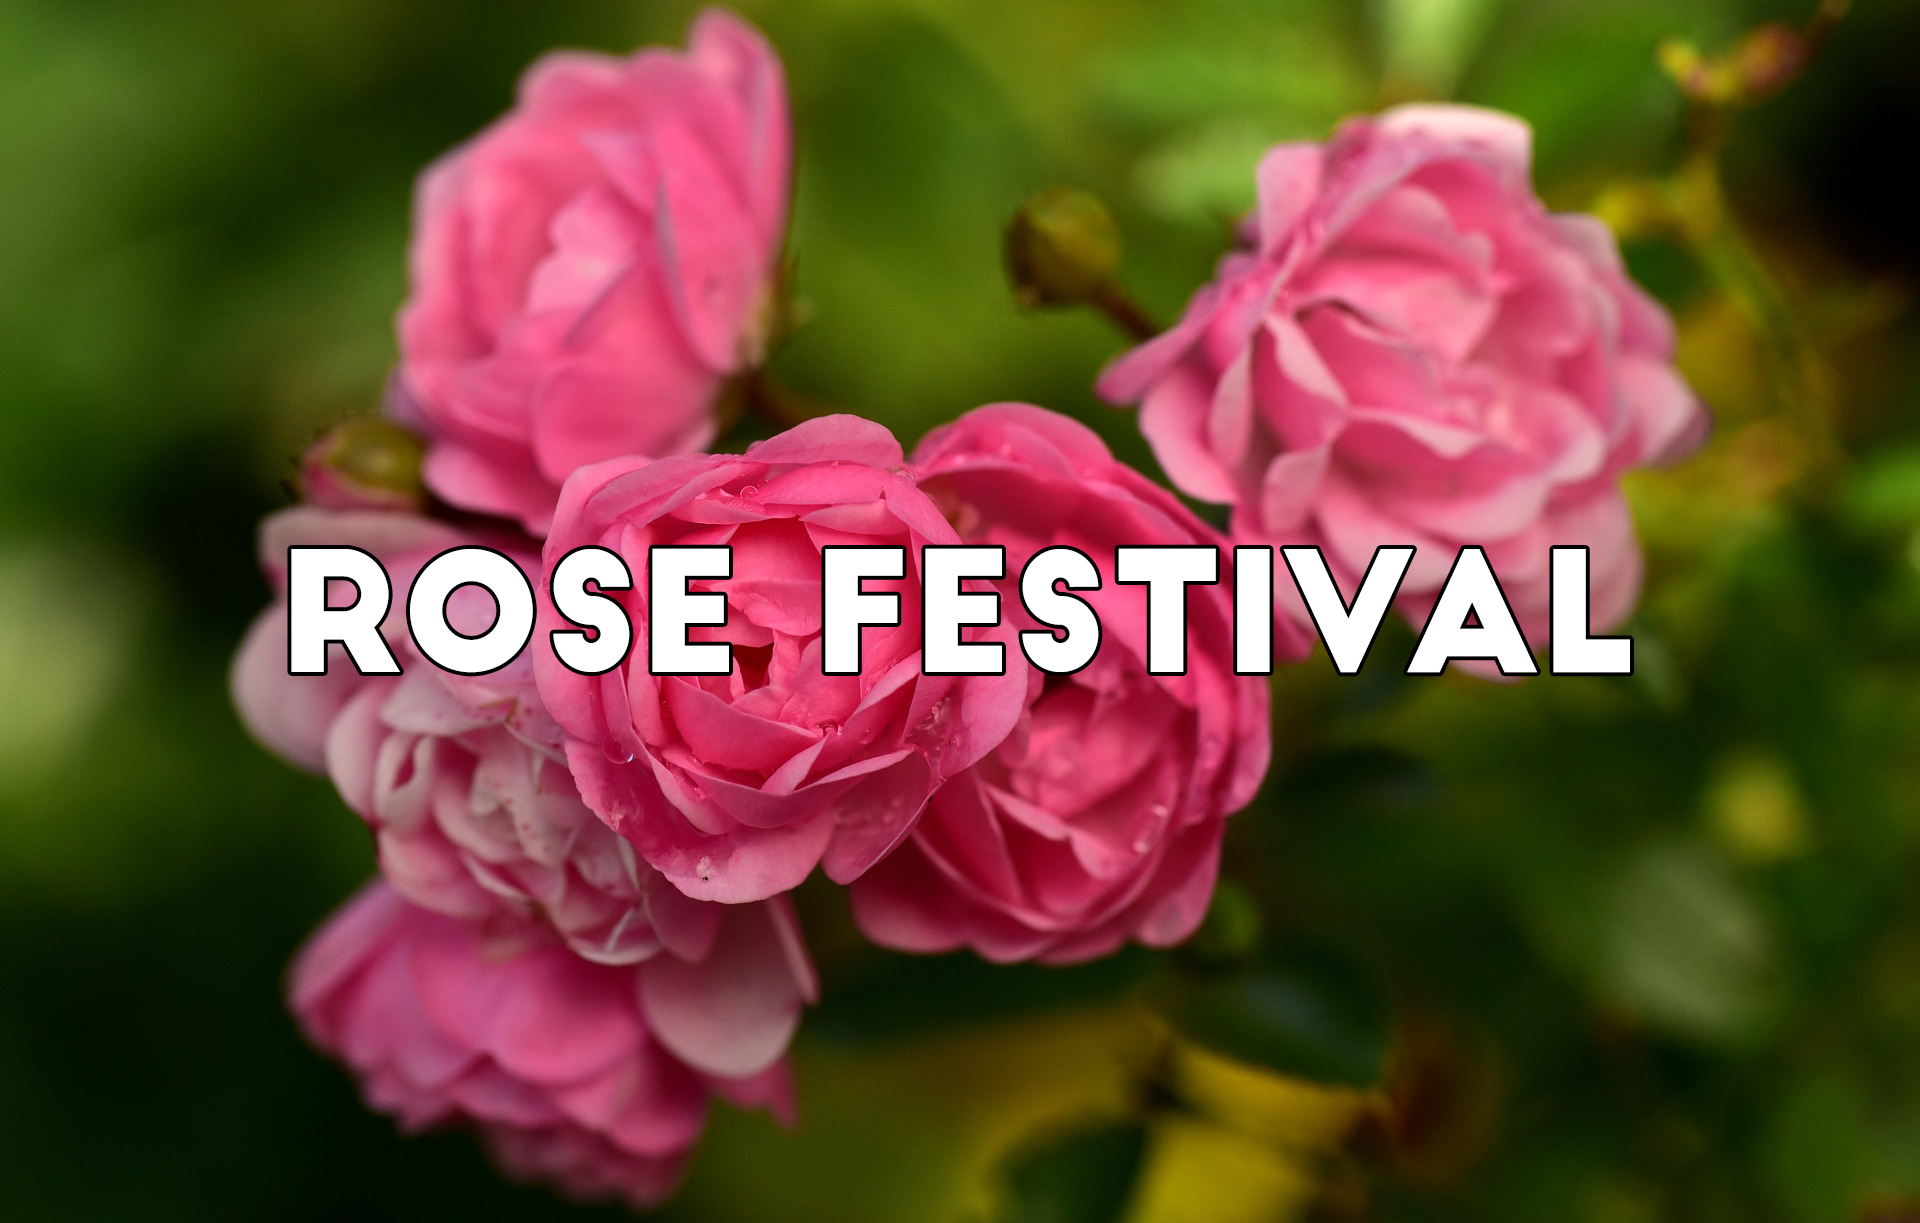 Our Rose Festival is On!